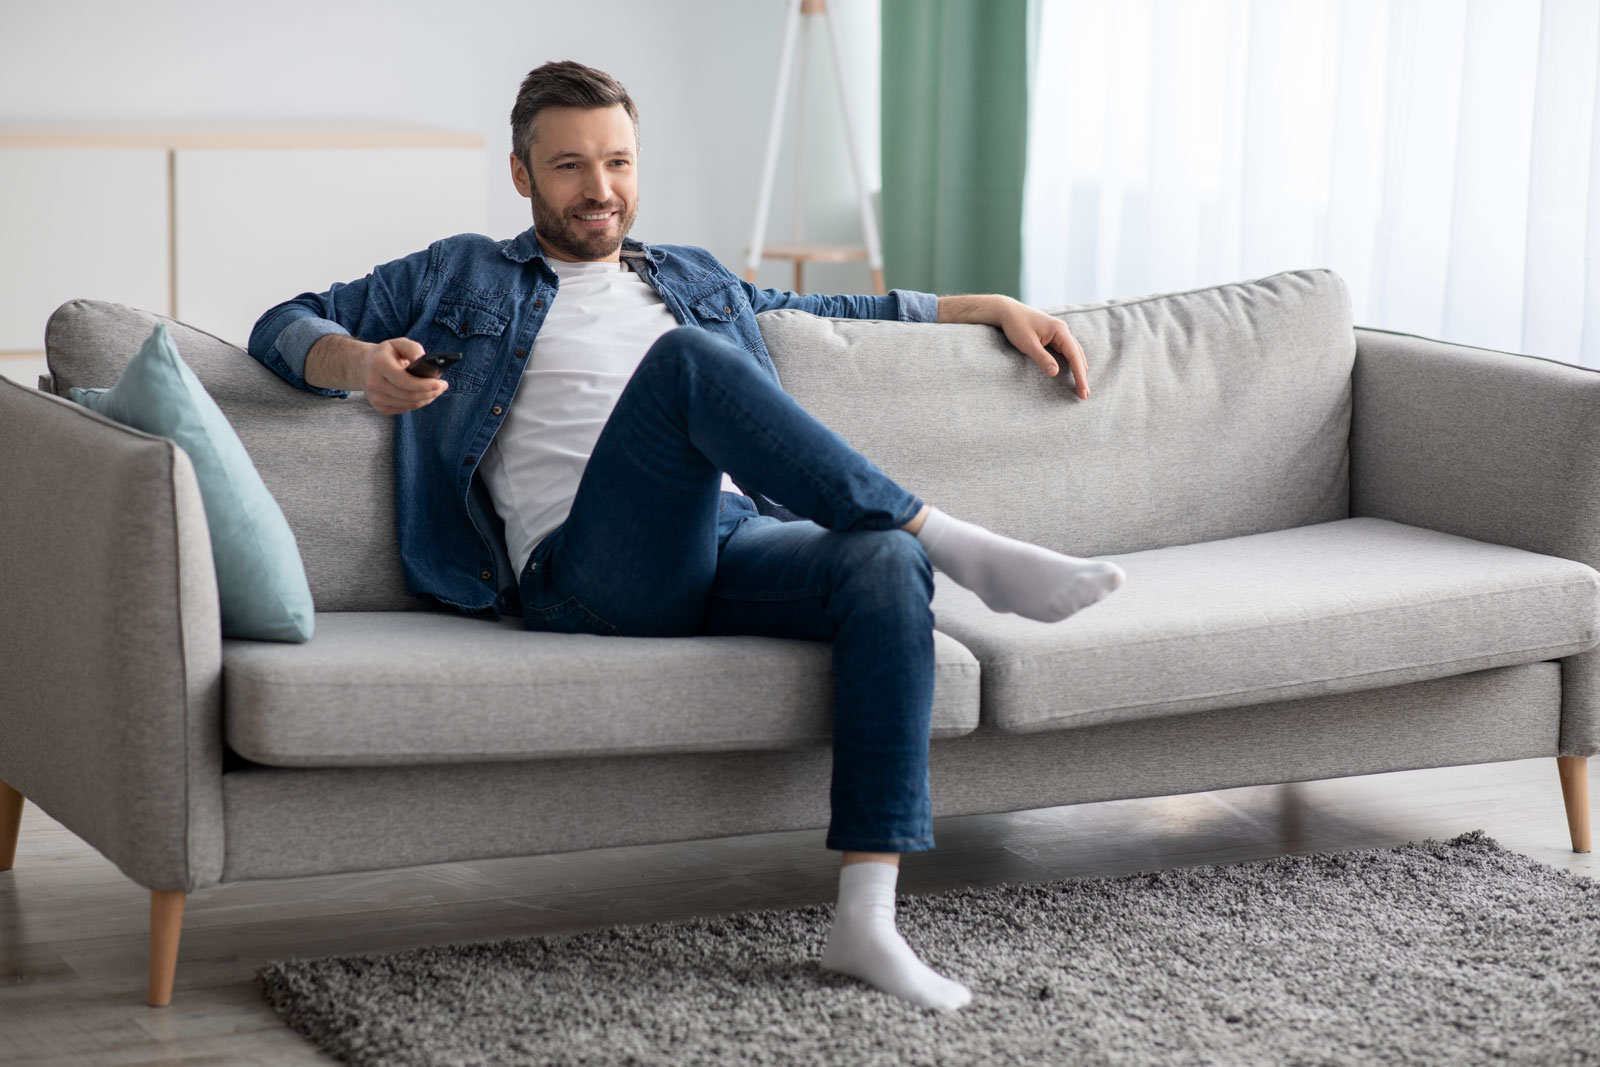 Watching TV at home. Relaxed middle-aged man having rest, switching channels with remote controller and smiling, empty space. Bearded man enjoying his weekend, watching TV in living room